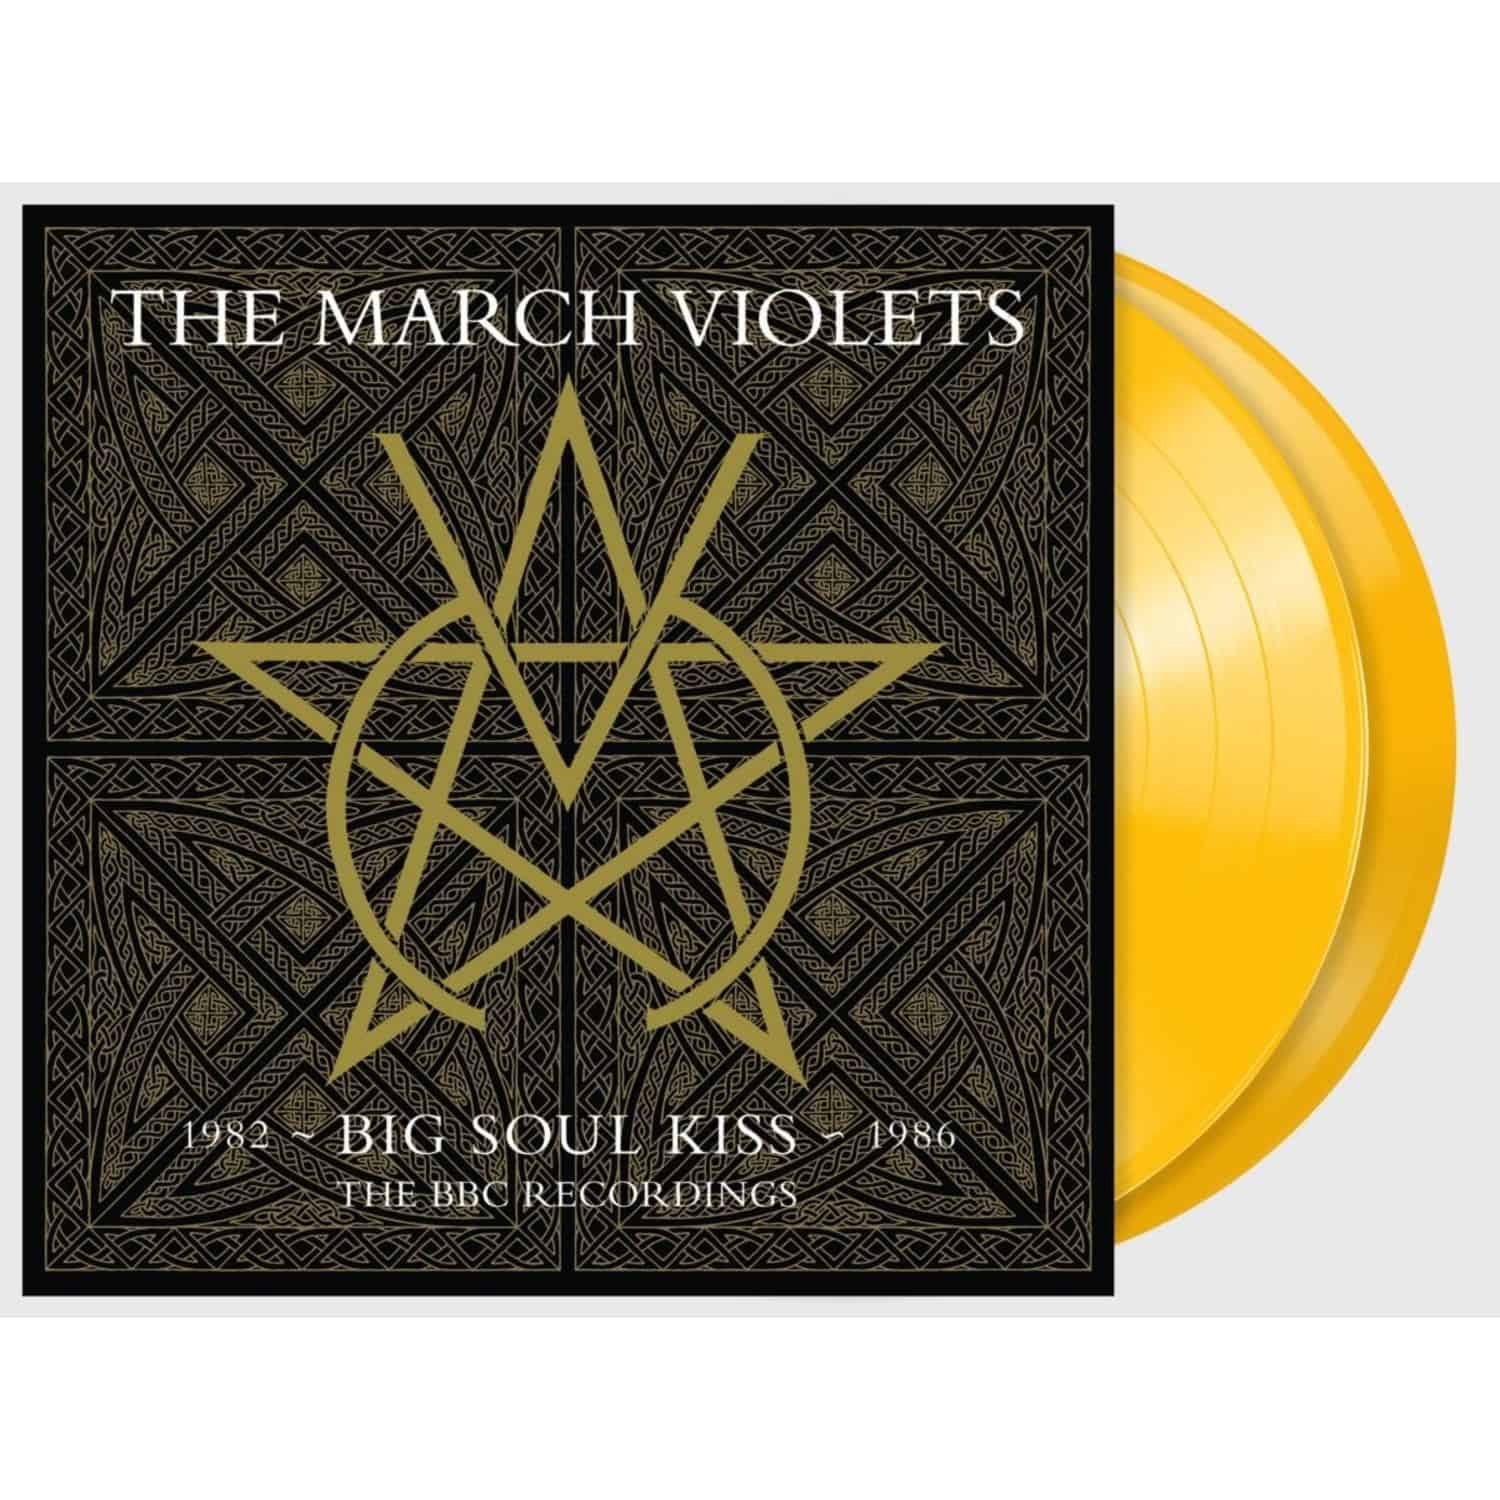 The March Violets - BIG SOUL KISS - THE BBC RECORDINGS 